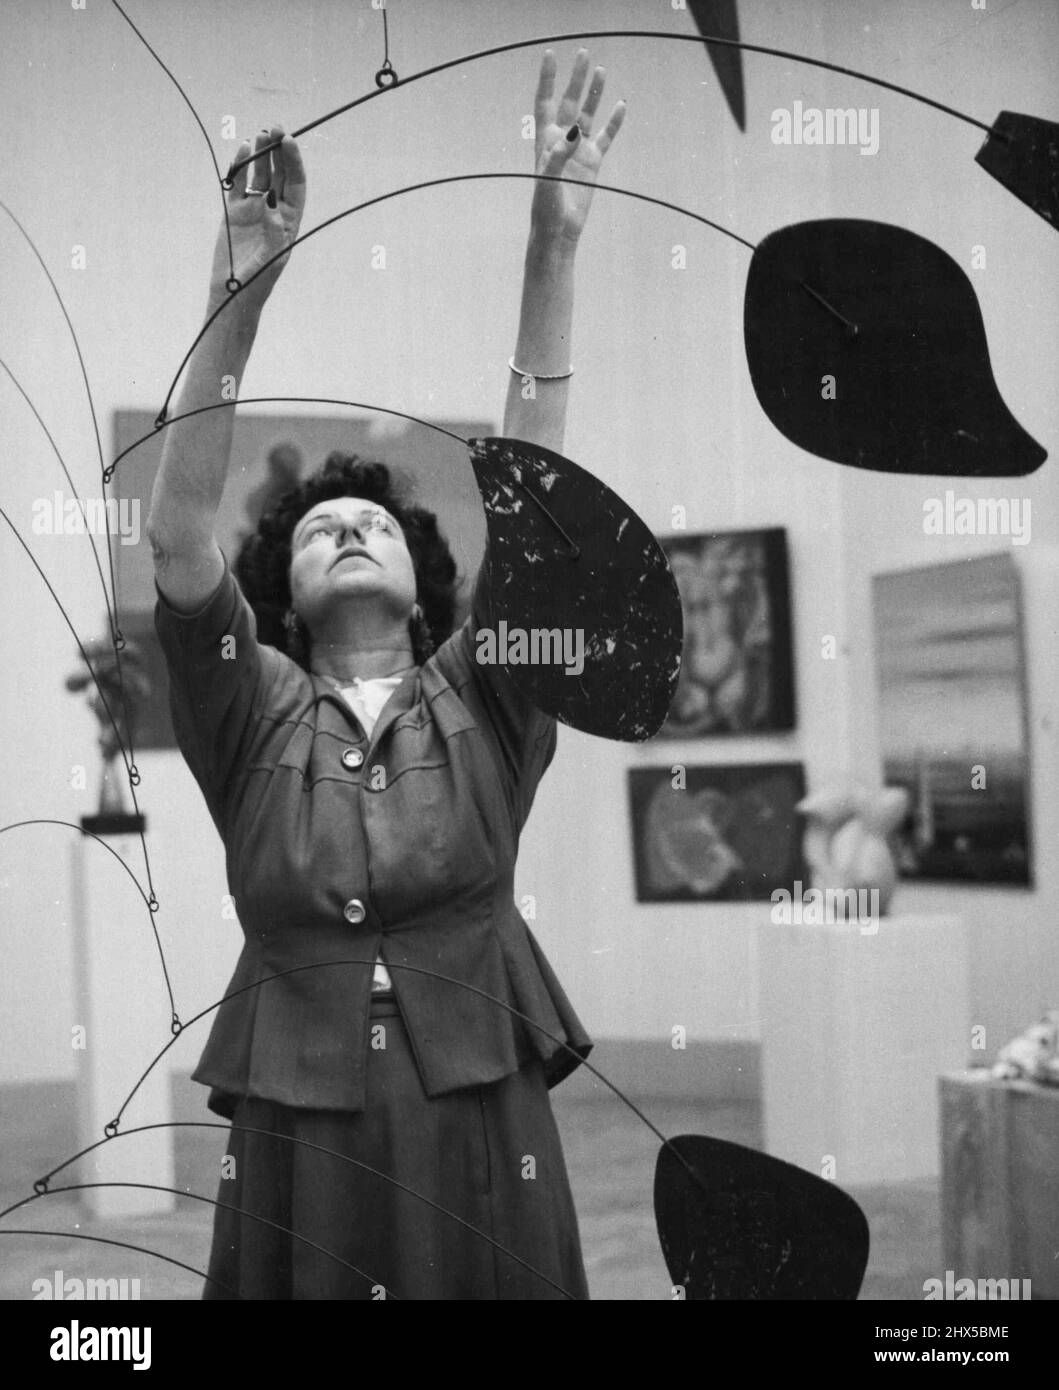 Peggy Guggenheim In Venice At the International Art Exhibition in Venice, Peggy takes ***** personally to put every one of her 'pieces' on its right place. Here she is with a fine sculpture by Alexander Calder. January 11, 1949. (Photo by Interfoto). Stock Photo